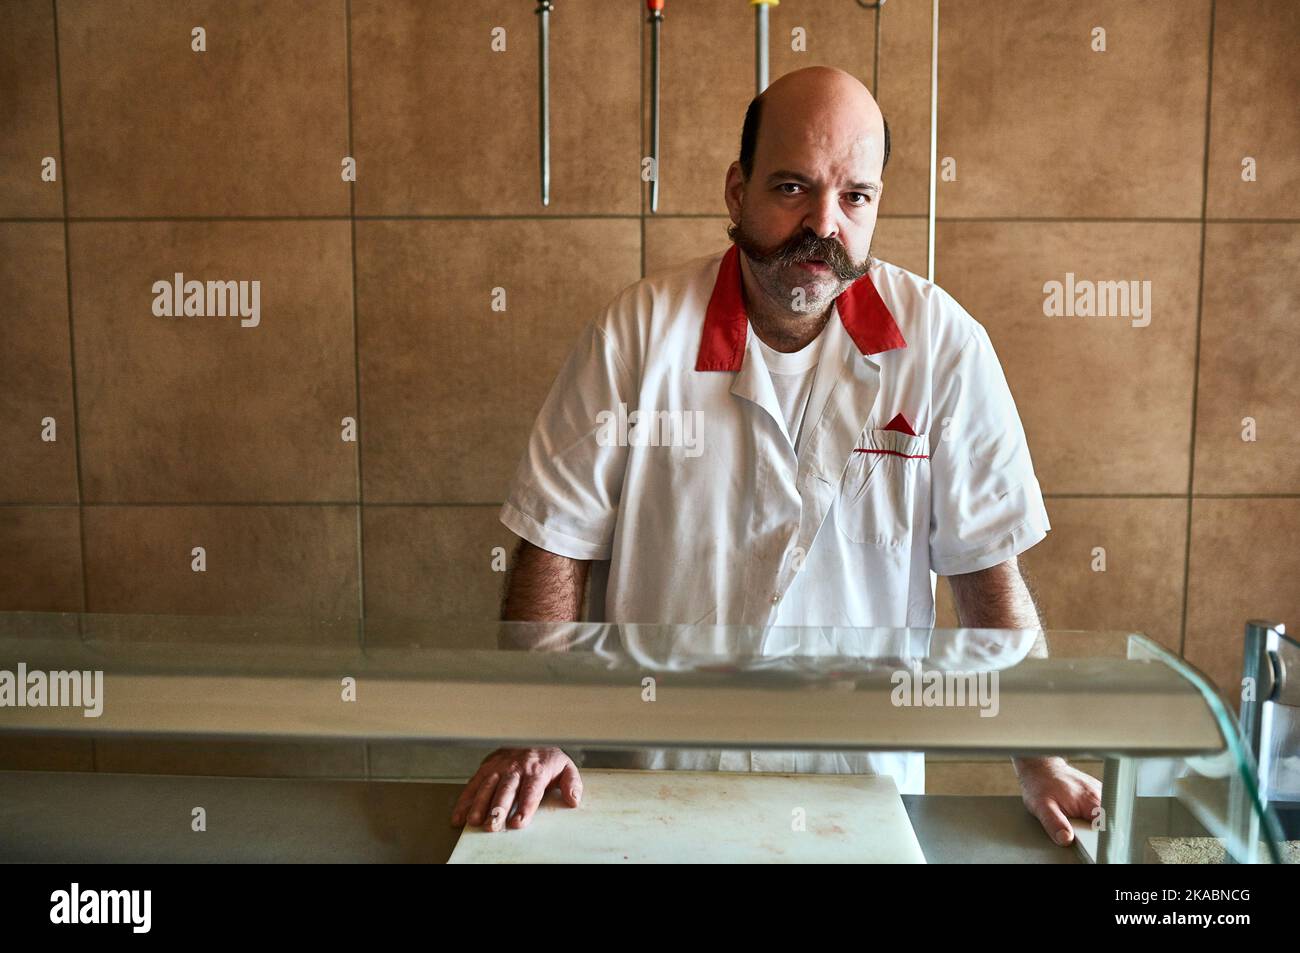 He knows the in and outs of the butchery business. a butcher at his store. Stock Photo